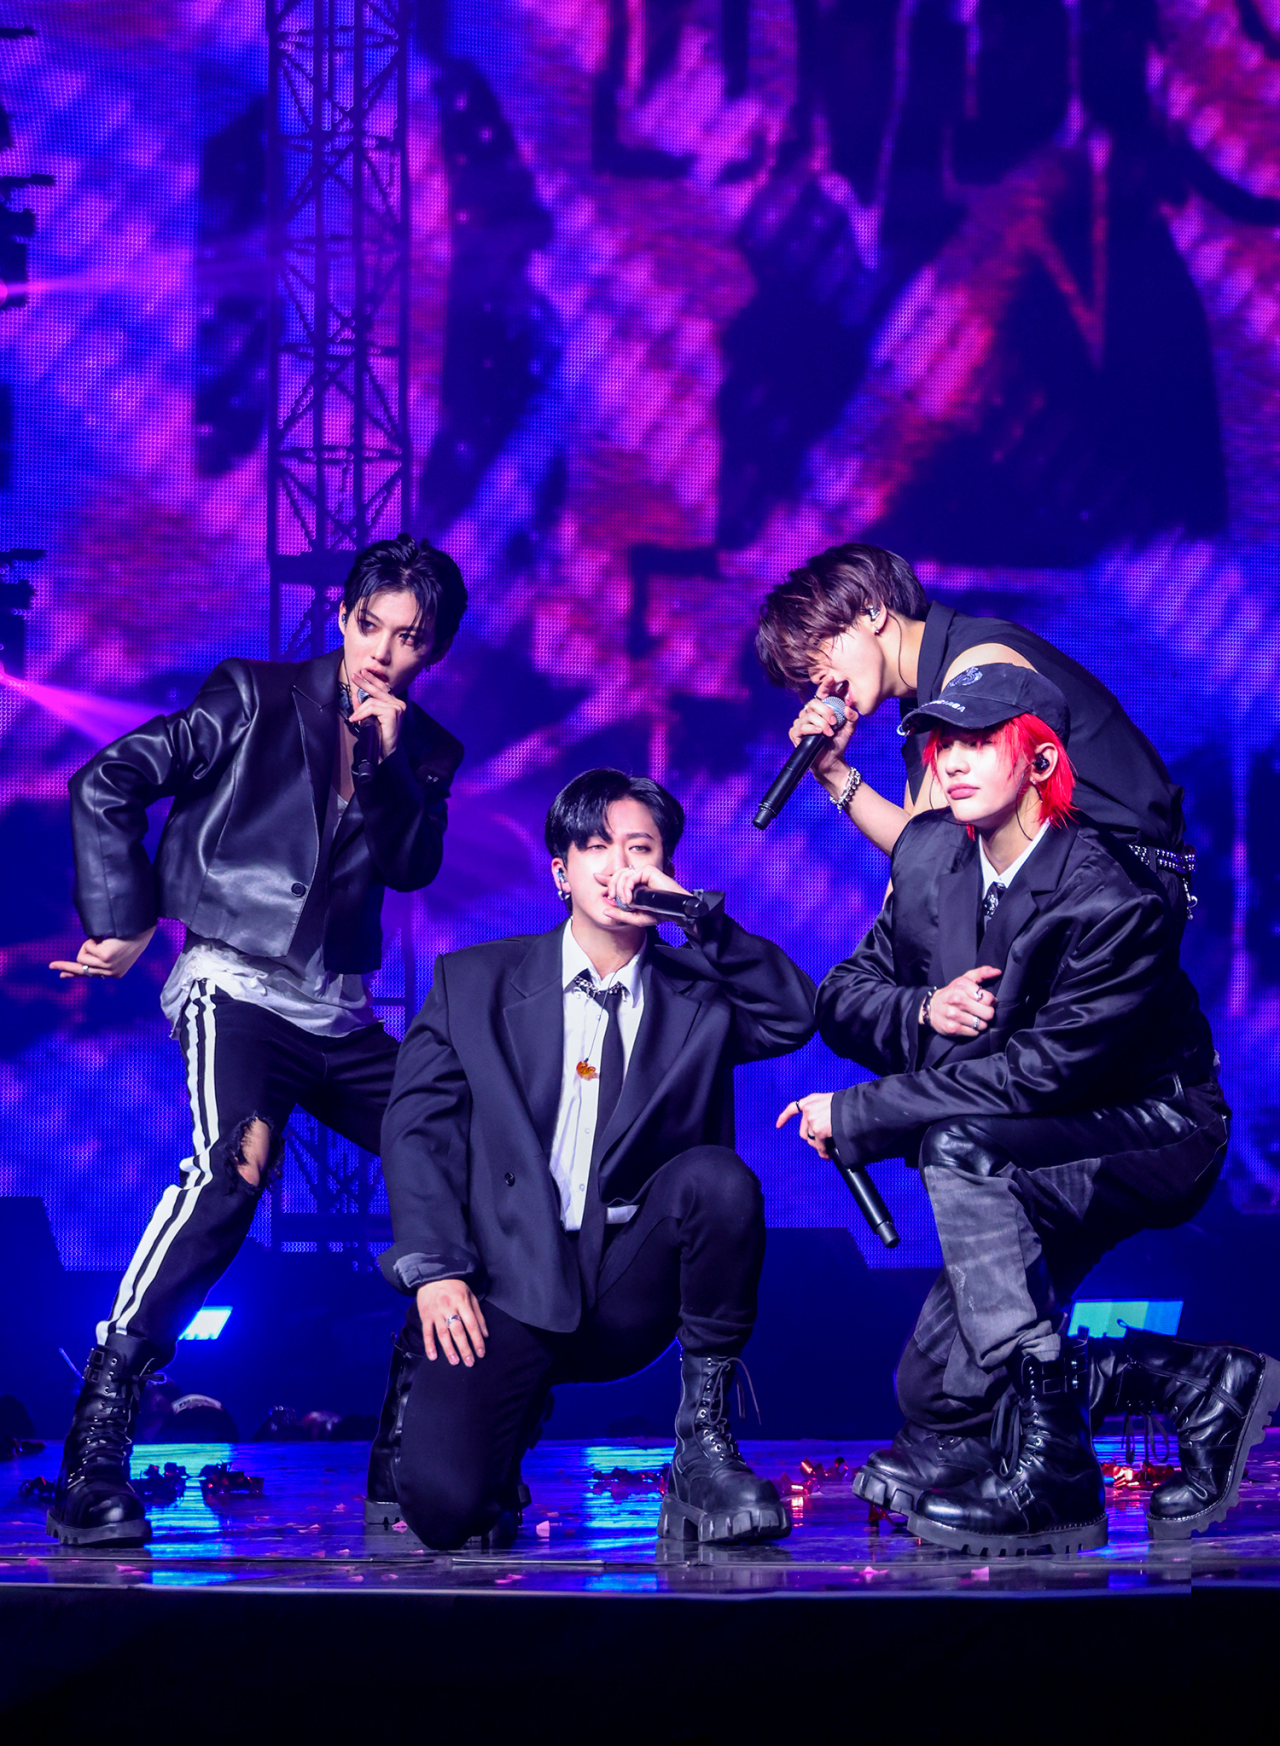 Chang-bin, Hyun-jin, Han and Felix of boy band Stray Kids perform “Muddy Water” during its second world tour, “Maniac,” in Seoul on Sunday. (JYP Entertainment)